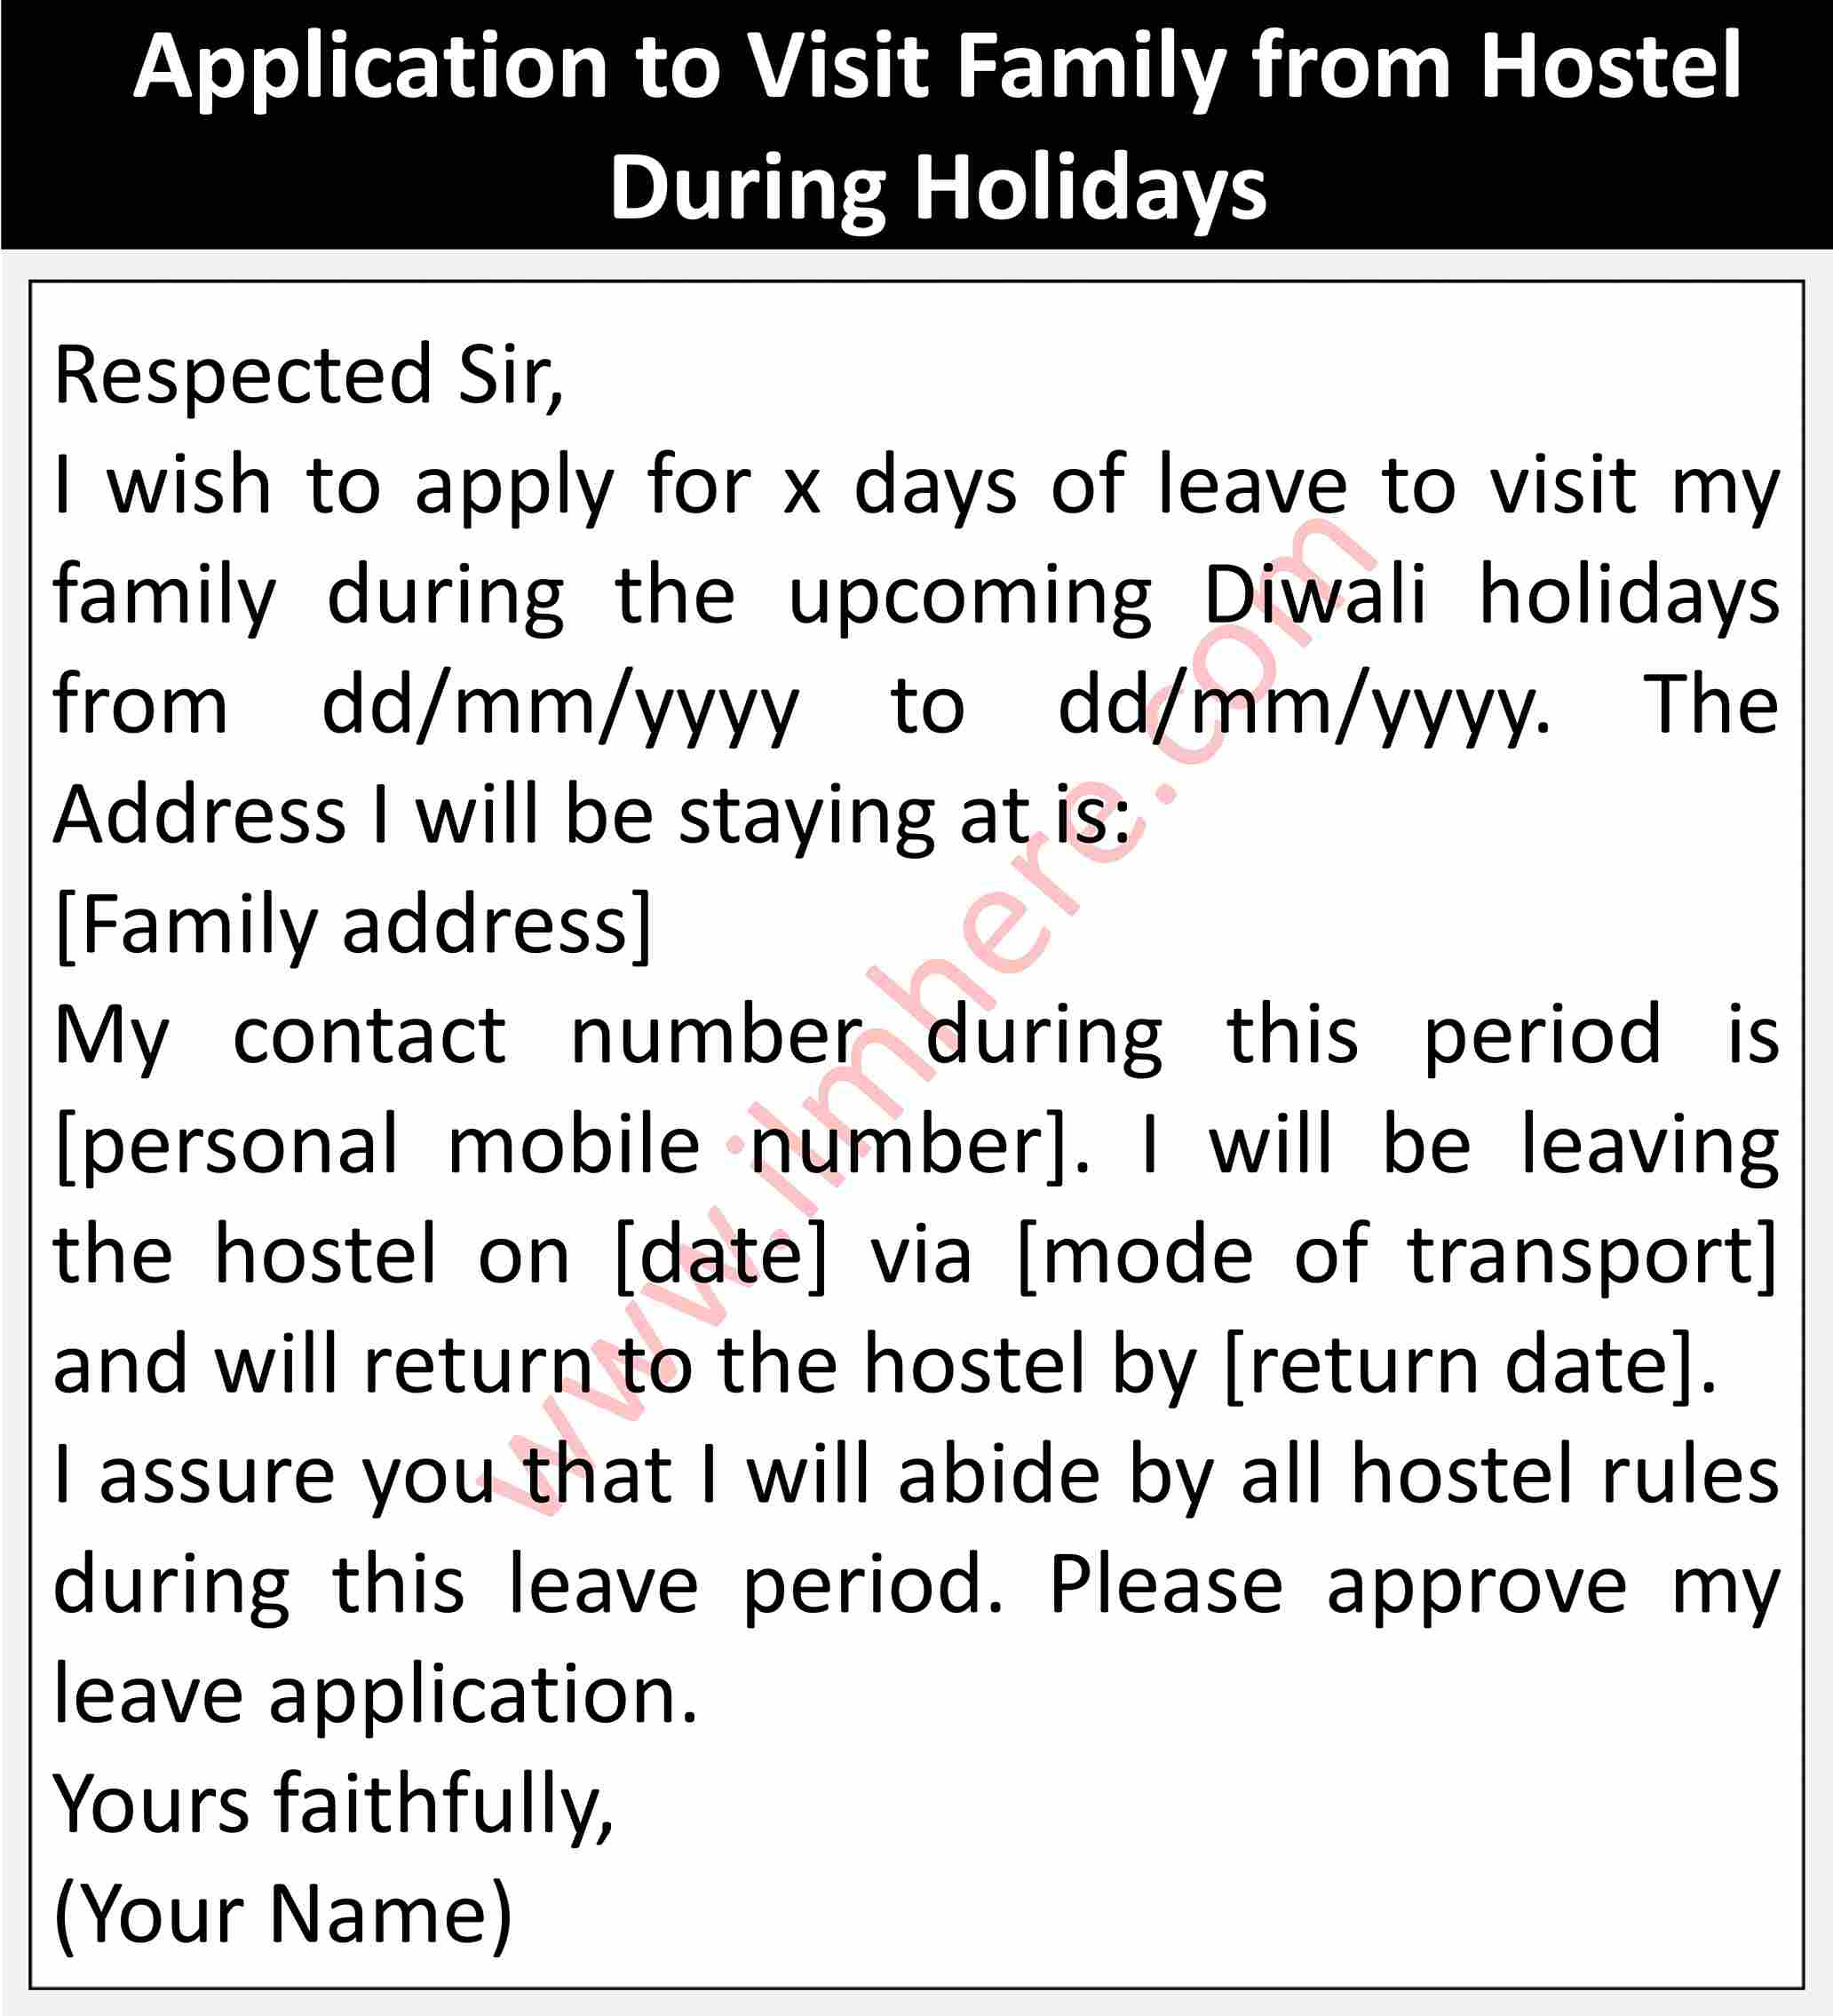 Application to Visit Family from Hostel During Holidays